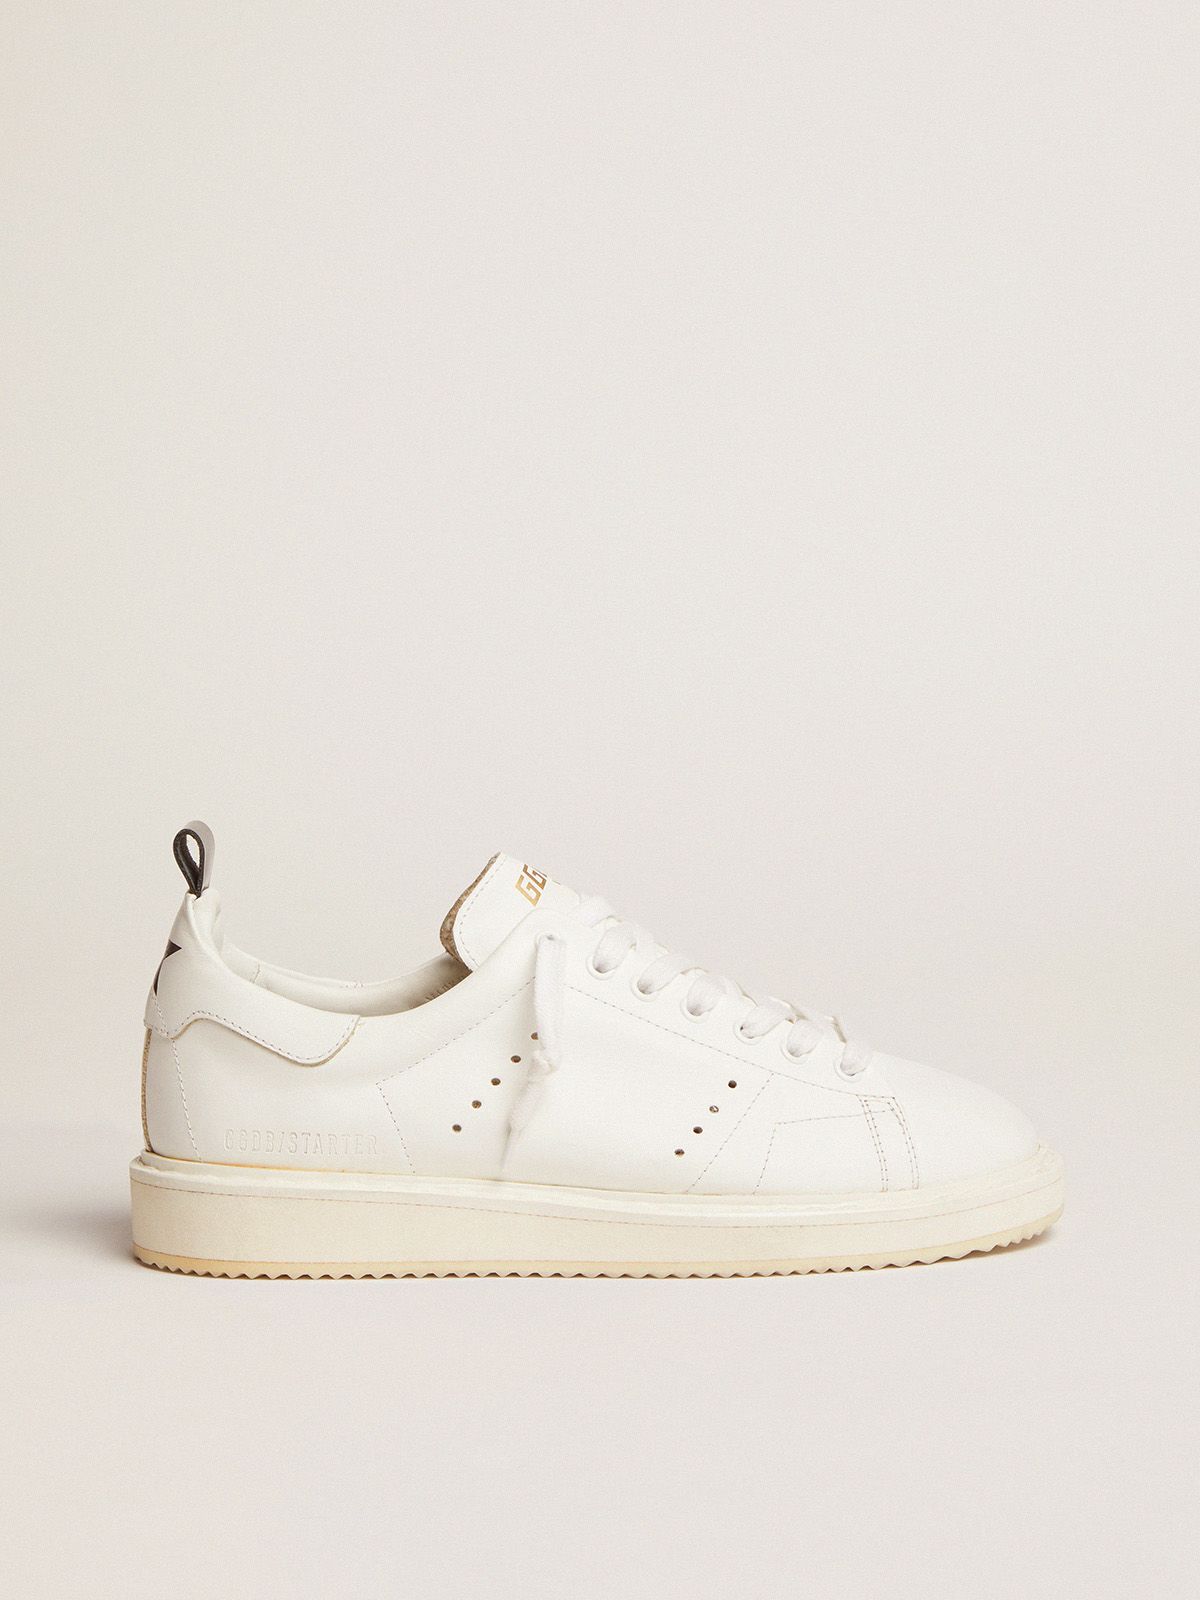 golden goose white sneakers Starter leather in total